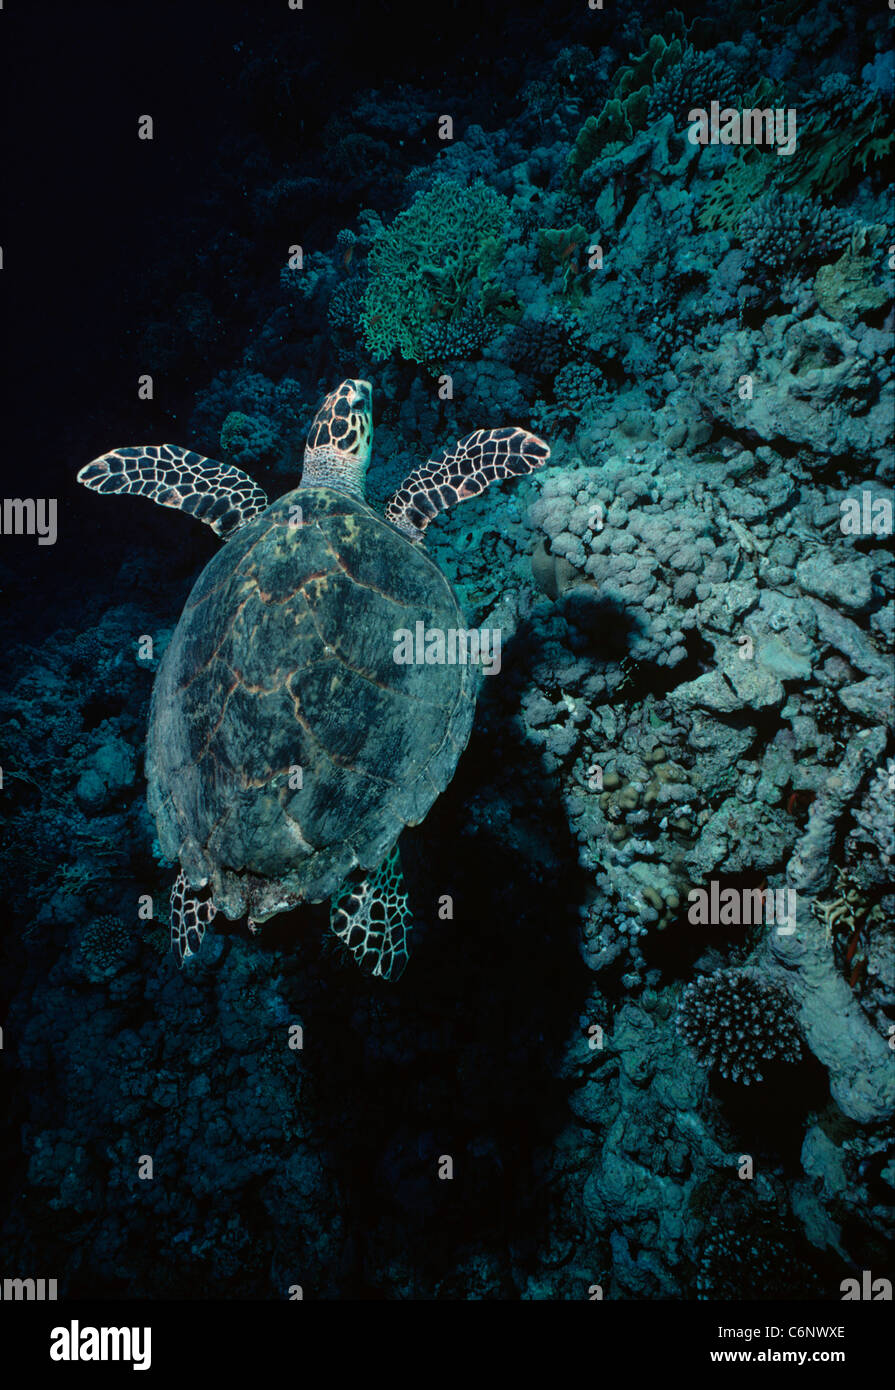 Hawksbill Turtle (Eretmochelys imbricata) swimming near a coral reef at night. Egypt, Red Sea Stock Photo